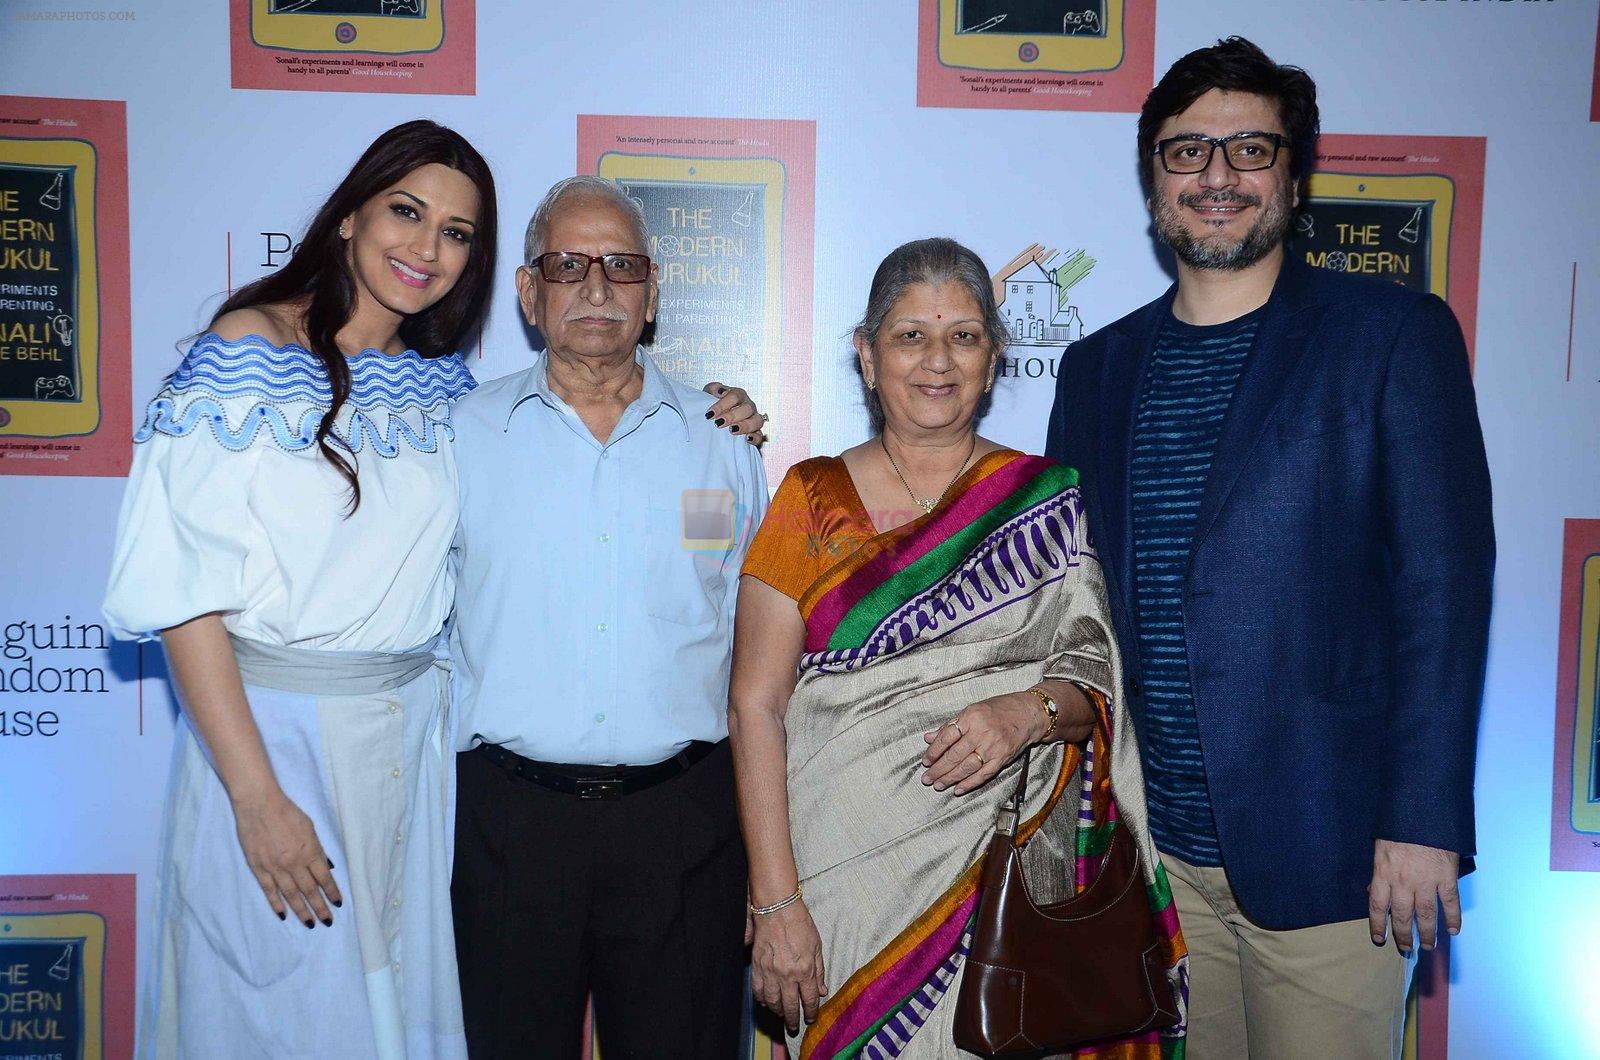 Sonali Bendre's book launch on 3rd March 2016